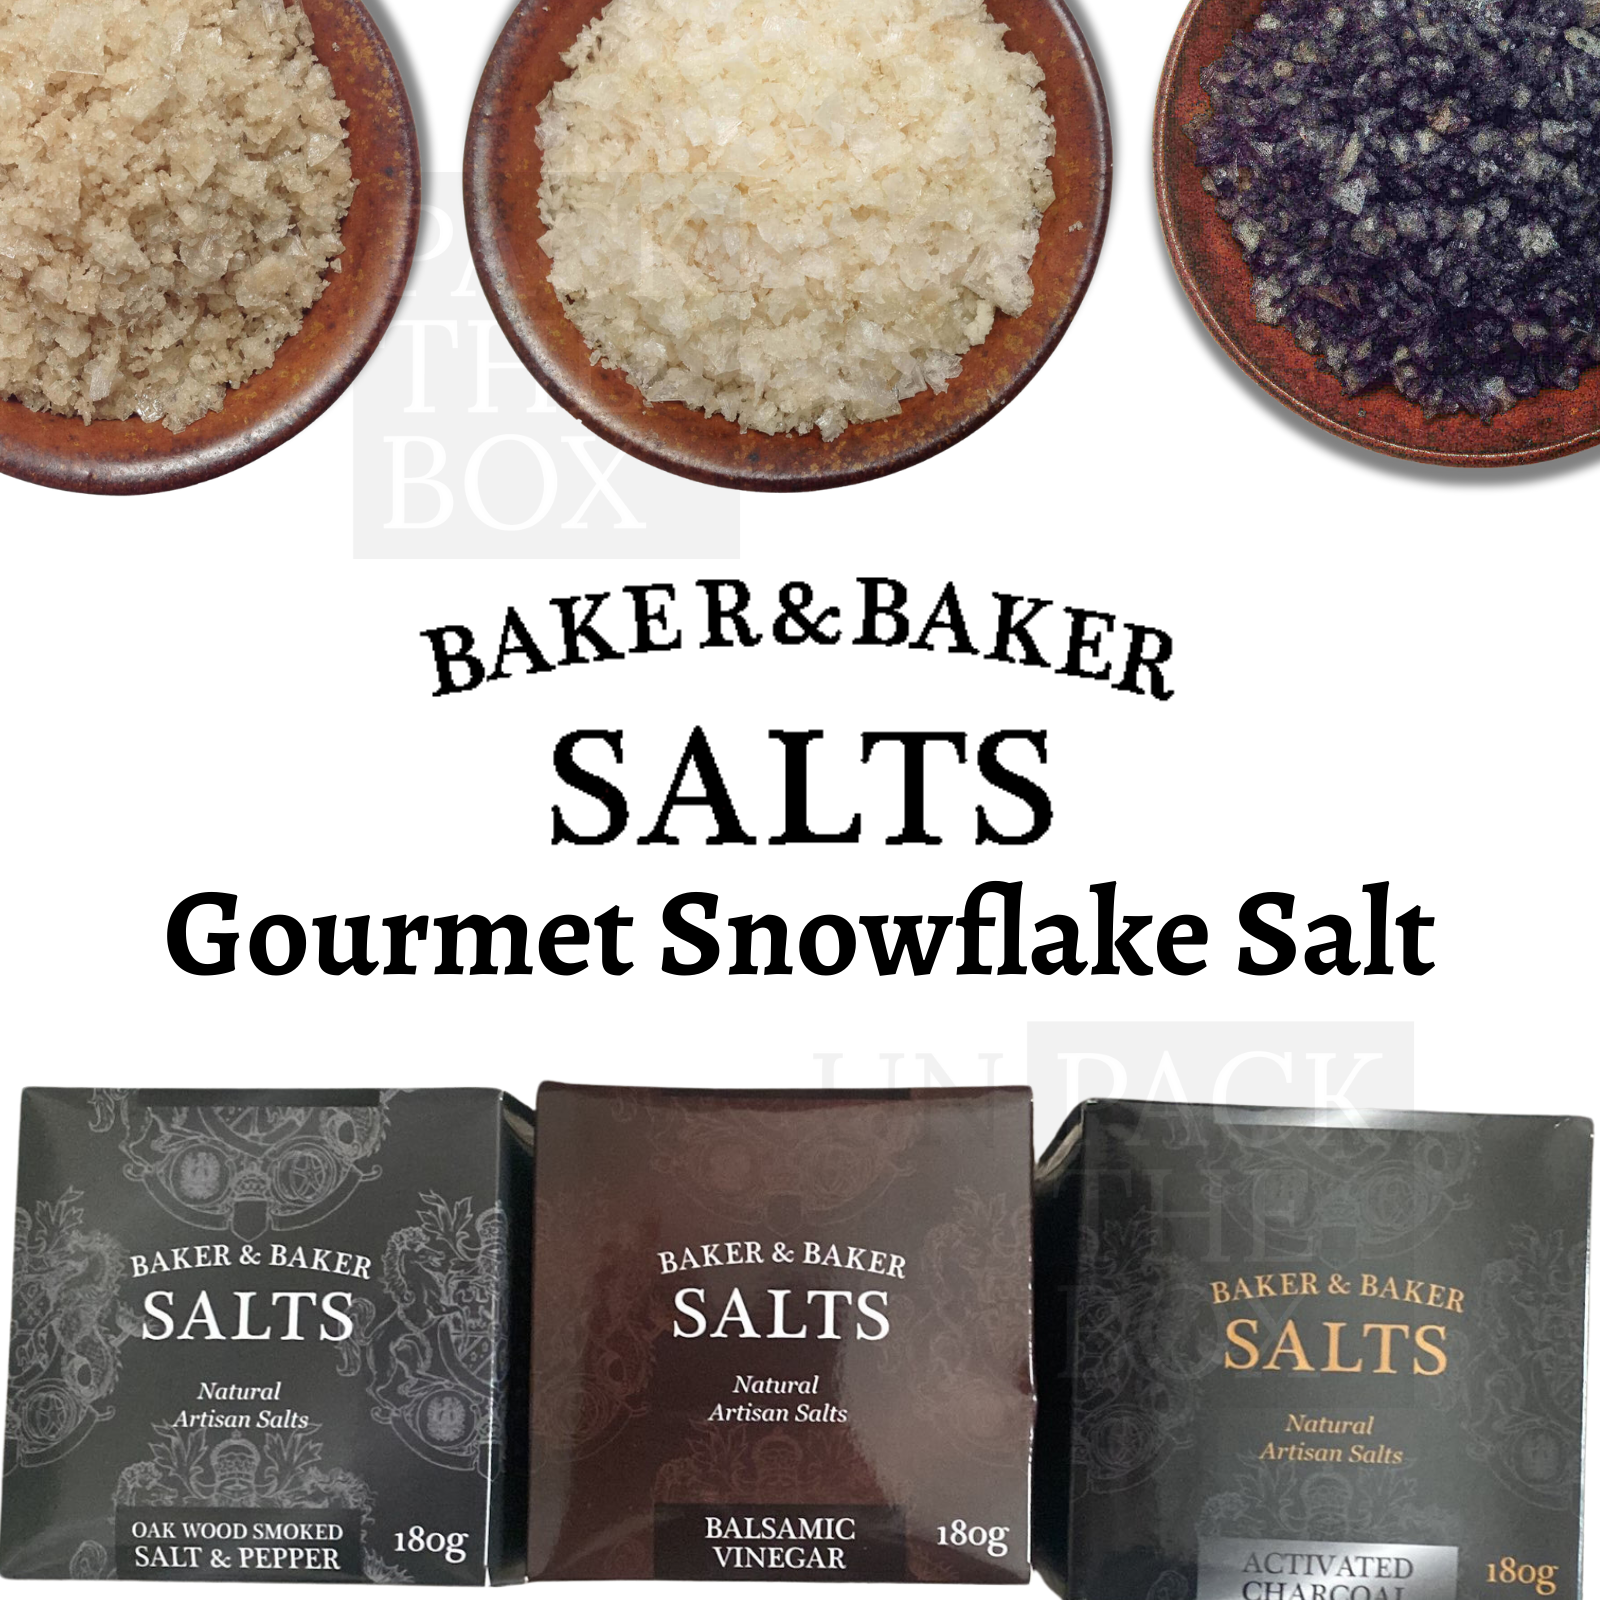 You will be captivated by the aromas and taste of this salt.